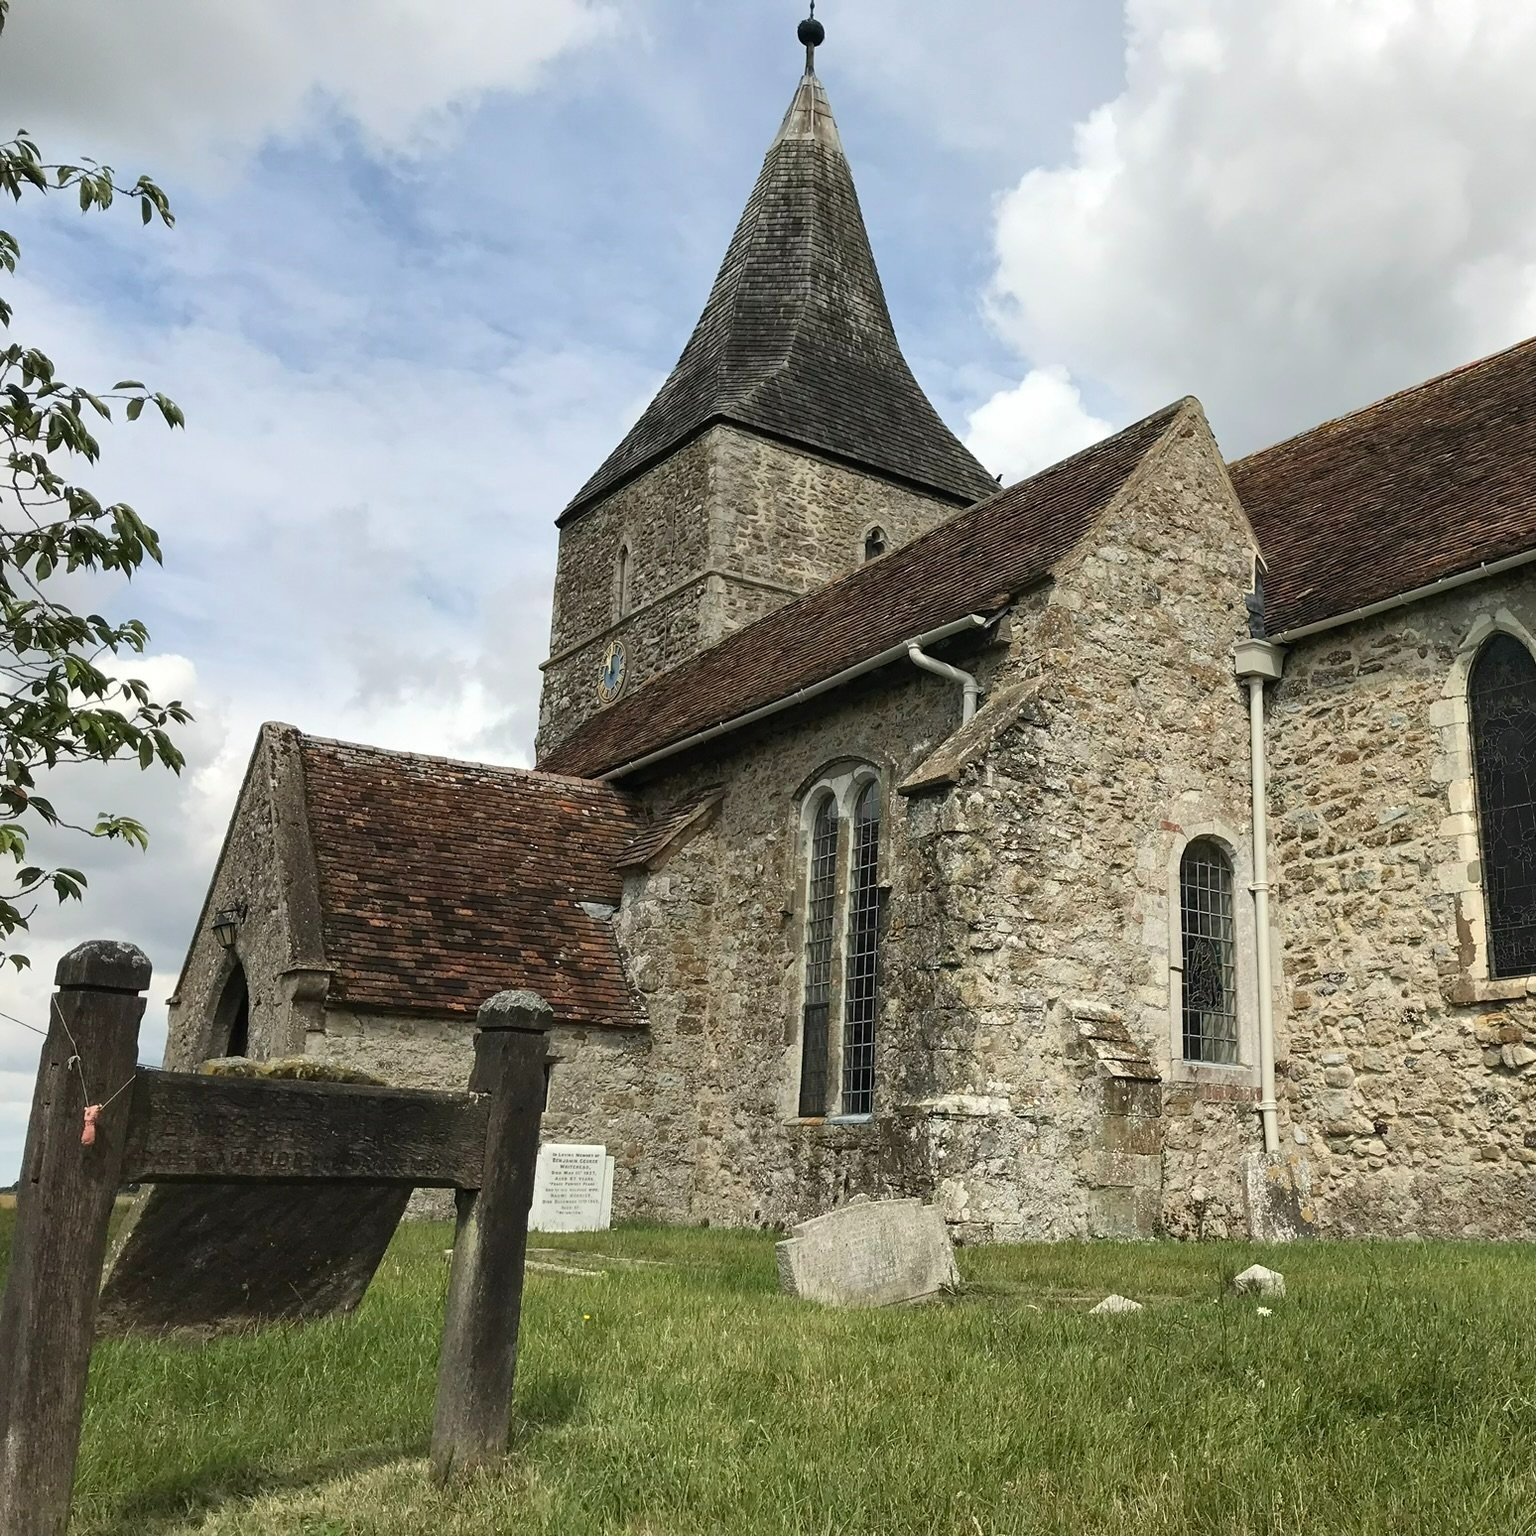 Author E. Nesbit is buried in the churchyard at St Mary in the Marsh.